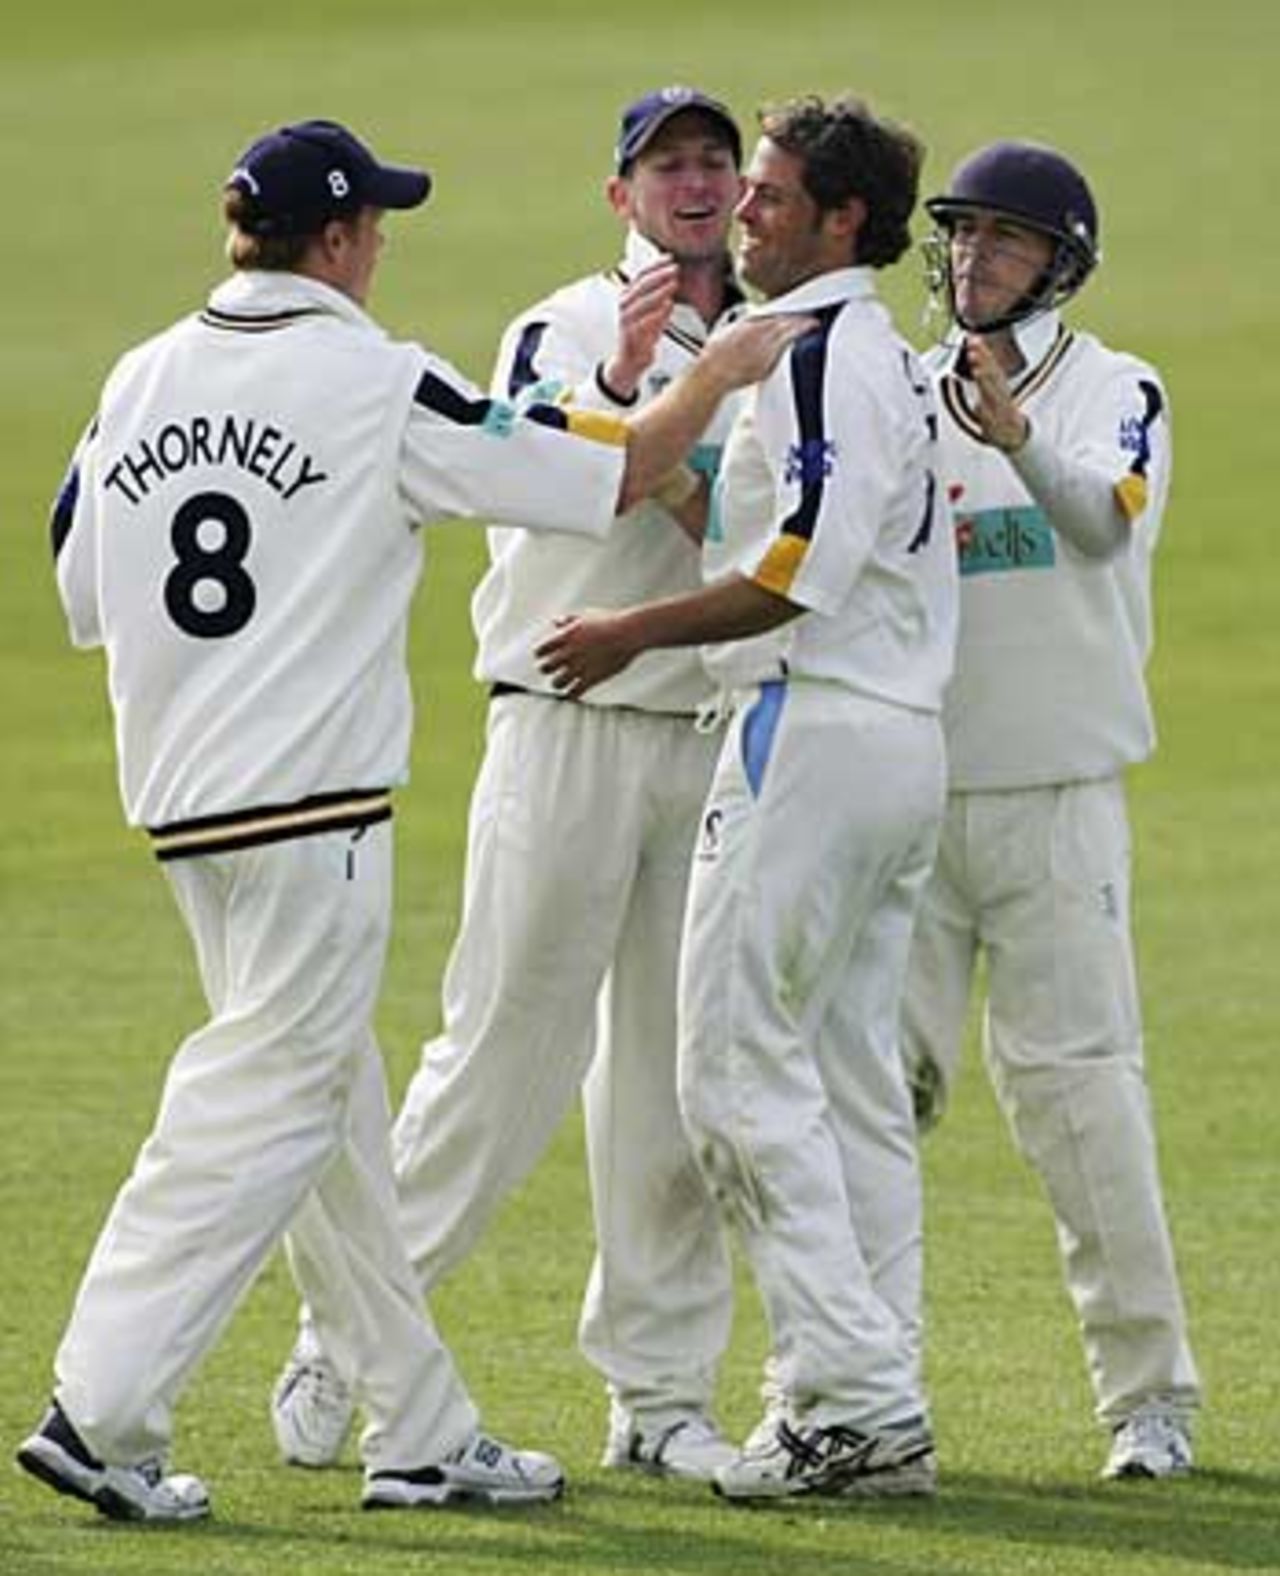 James Bruce is congratulated on the wicket of Mushtaq Ahmed, Hampshire v Sussex, Southampton, April 26, 2006